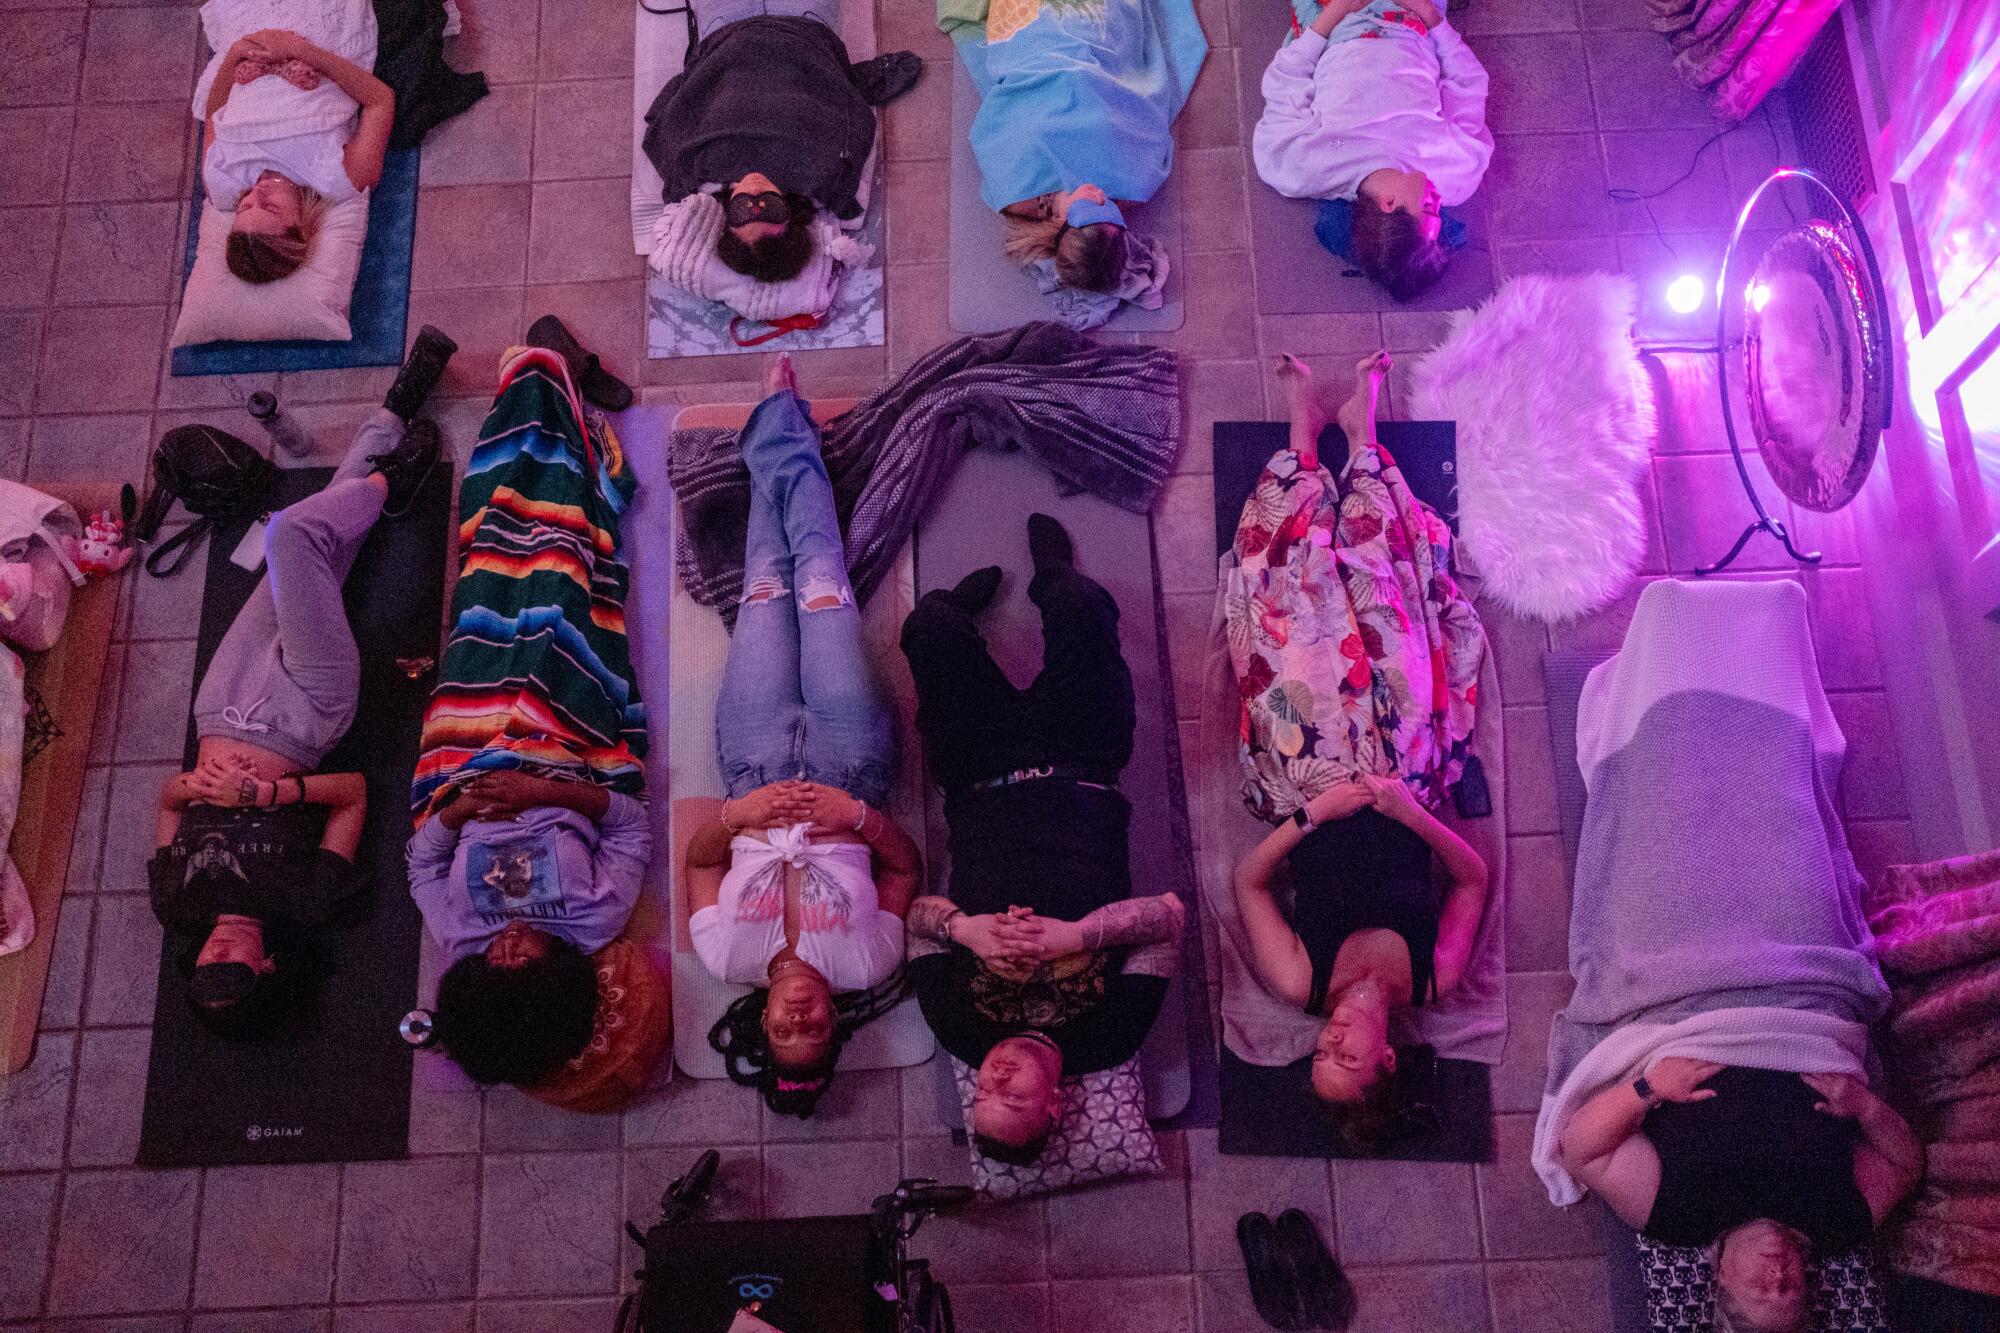 Guests lie on the floor while relaxing during a sound bath event at the First Congregational Church of Los Angeles.